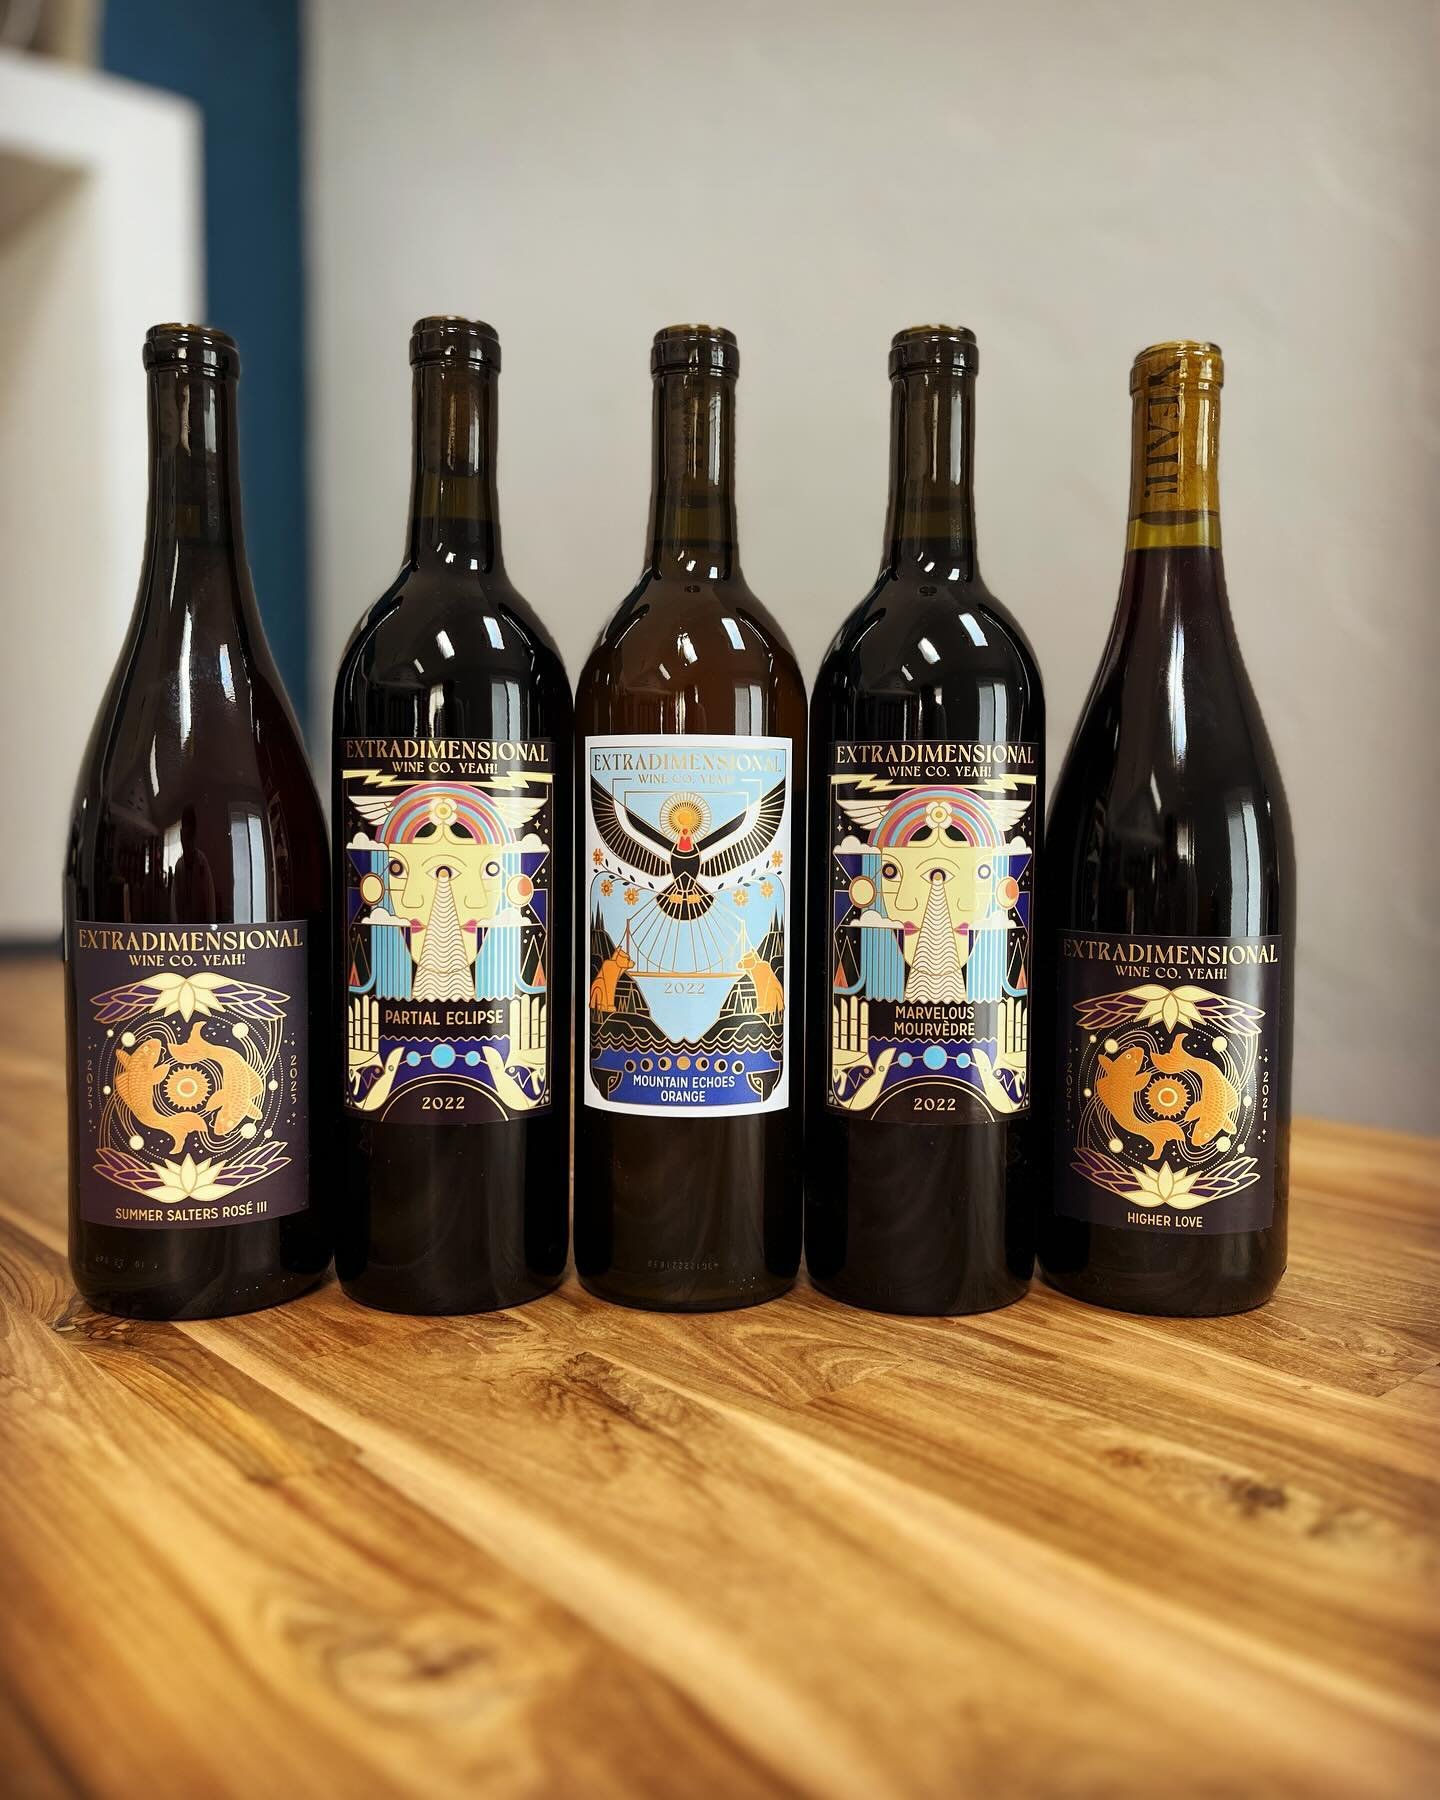 The stunning wines of Hardy Wallace &amp; Kate Graham are back in Colorado, but with a new identity. Say hi to @winecoyeah!

Hardy Wallace was the wine maker of the amazing California winery, &ldquo;Dirty and Rowdy&rdquo; for many years. That company